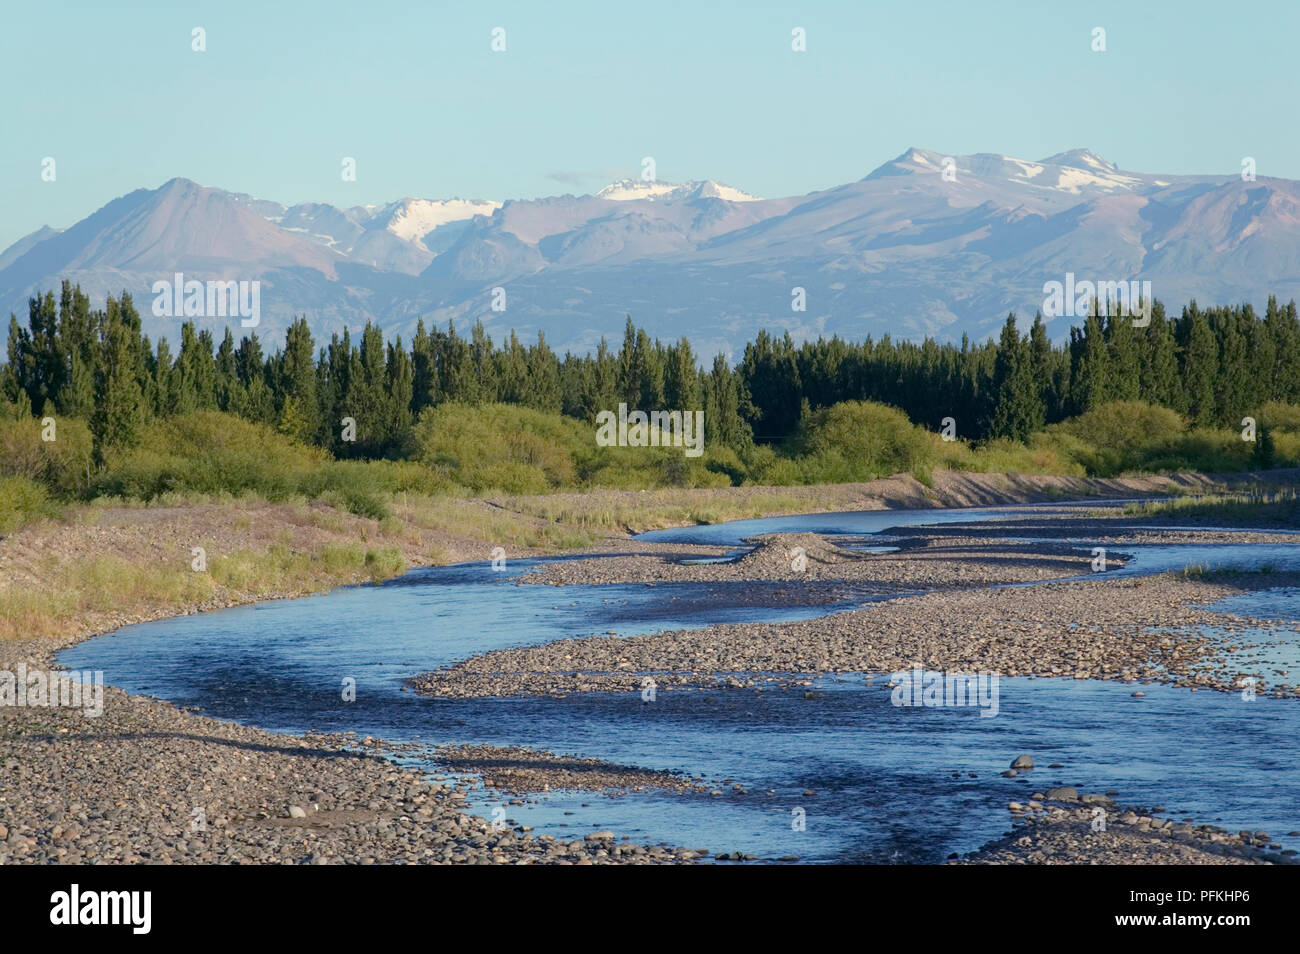 Argentina, Patagonia, Los Antiguos, shelterbelts of poplar trees between winding river and snowcapped Andes in distance Stock Photo